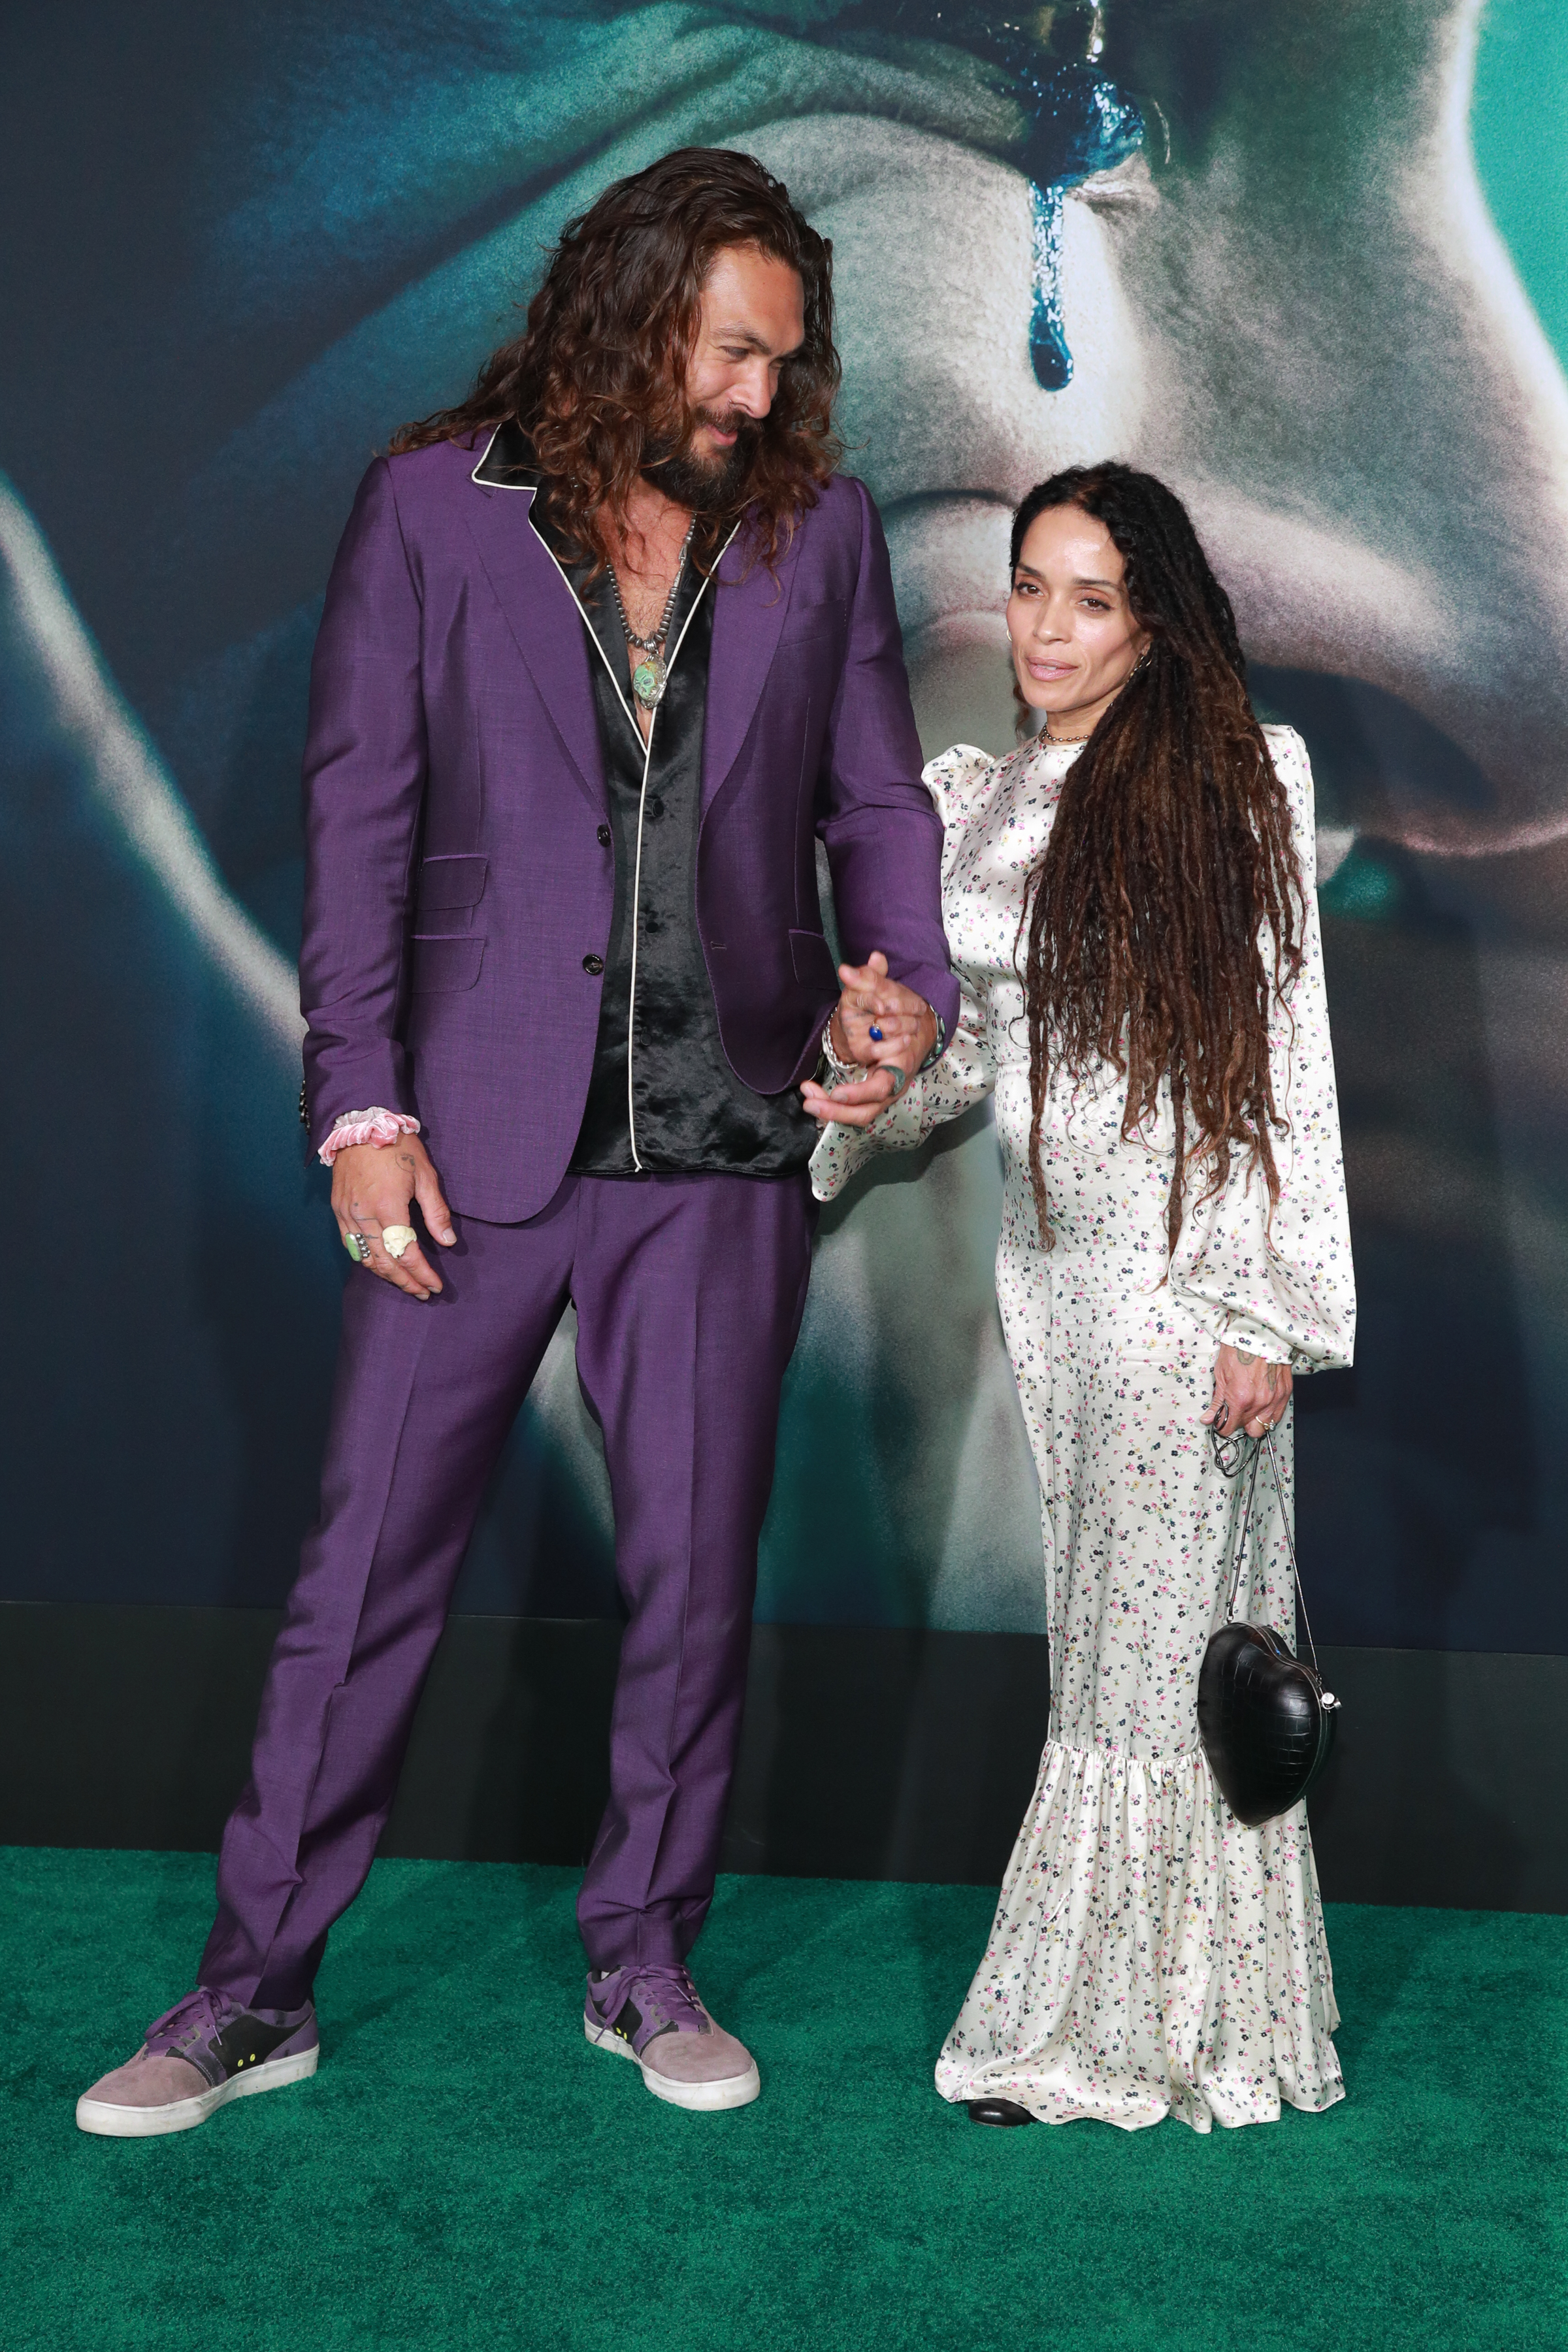 Jason Momoa and Lisa Bonet at the premiere of "Joker" in Hollywood, California on September 28, 2019 | Source: Getty Images